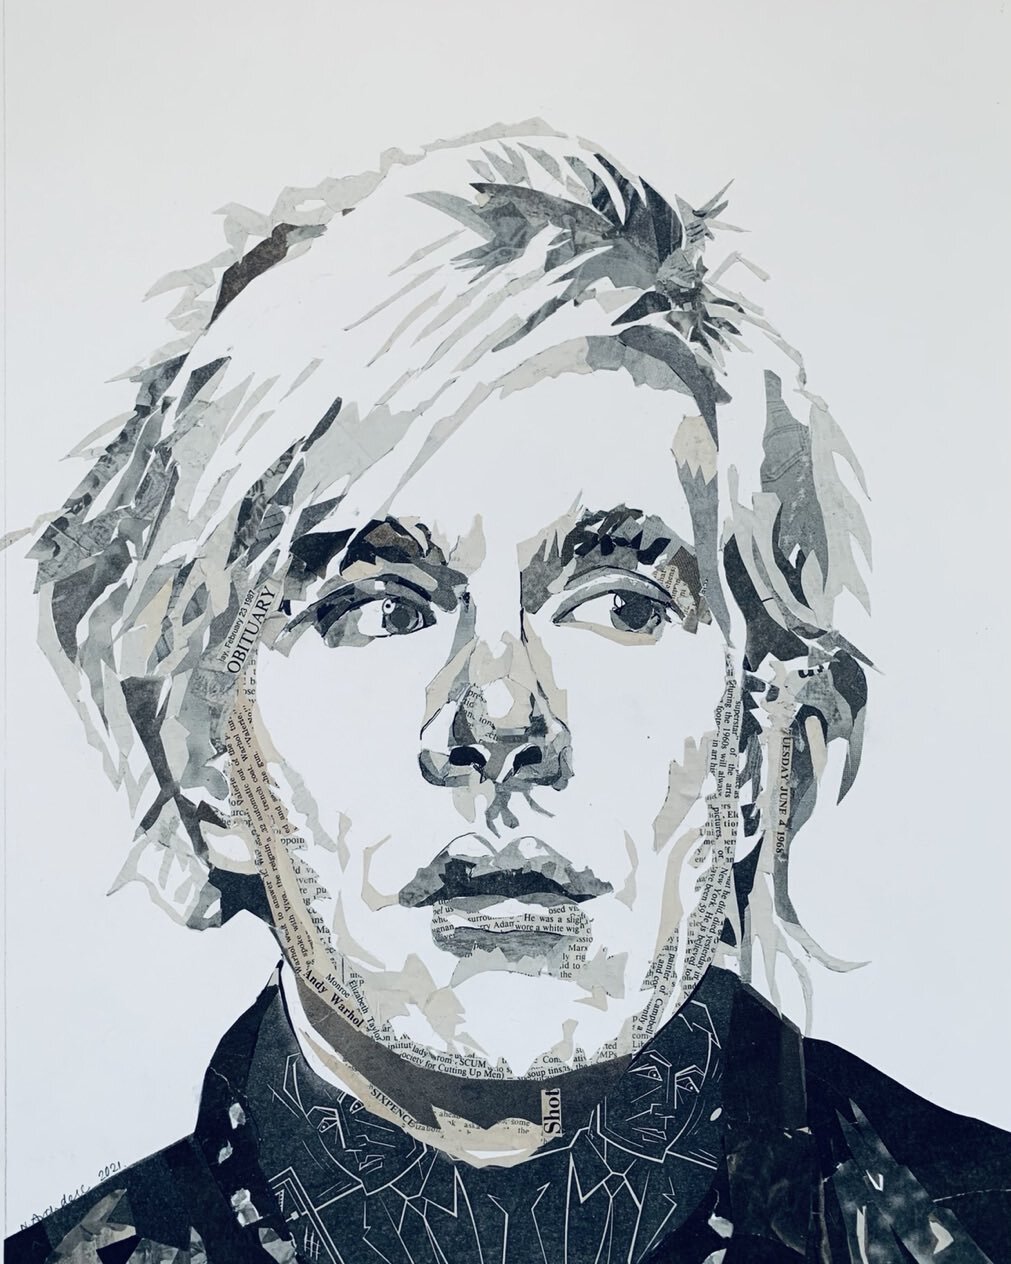 Andy Warhol 
Made entirely out of newspapers from the day he was shot on 3rd June 1968 and the day he died 22nd February 1987. The newspapers from 1968 kept disintegrating which made it challenging.

#andywarhol #portraitart #mixedmediacollage #mixed